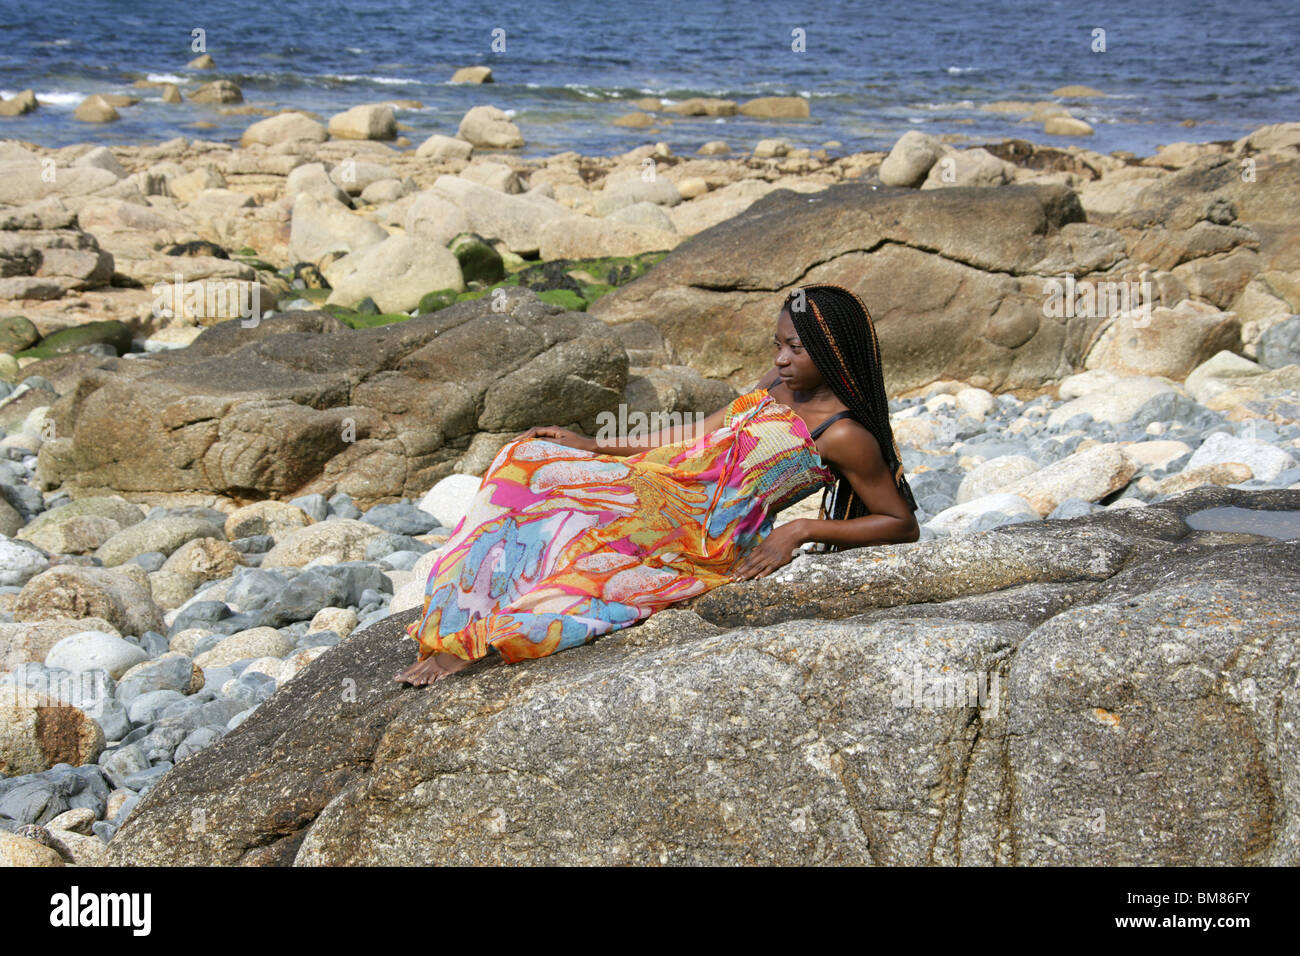 African Woman with Dreadlocks, and Wearing a Colourful Dress, Laying on Rocks by the Sea. Stock Photo